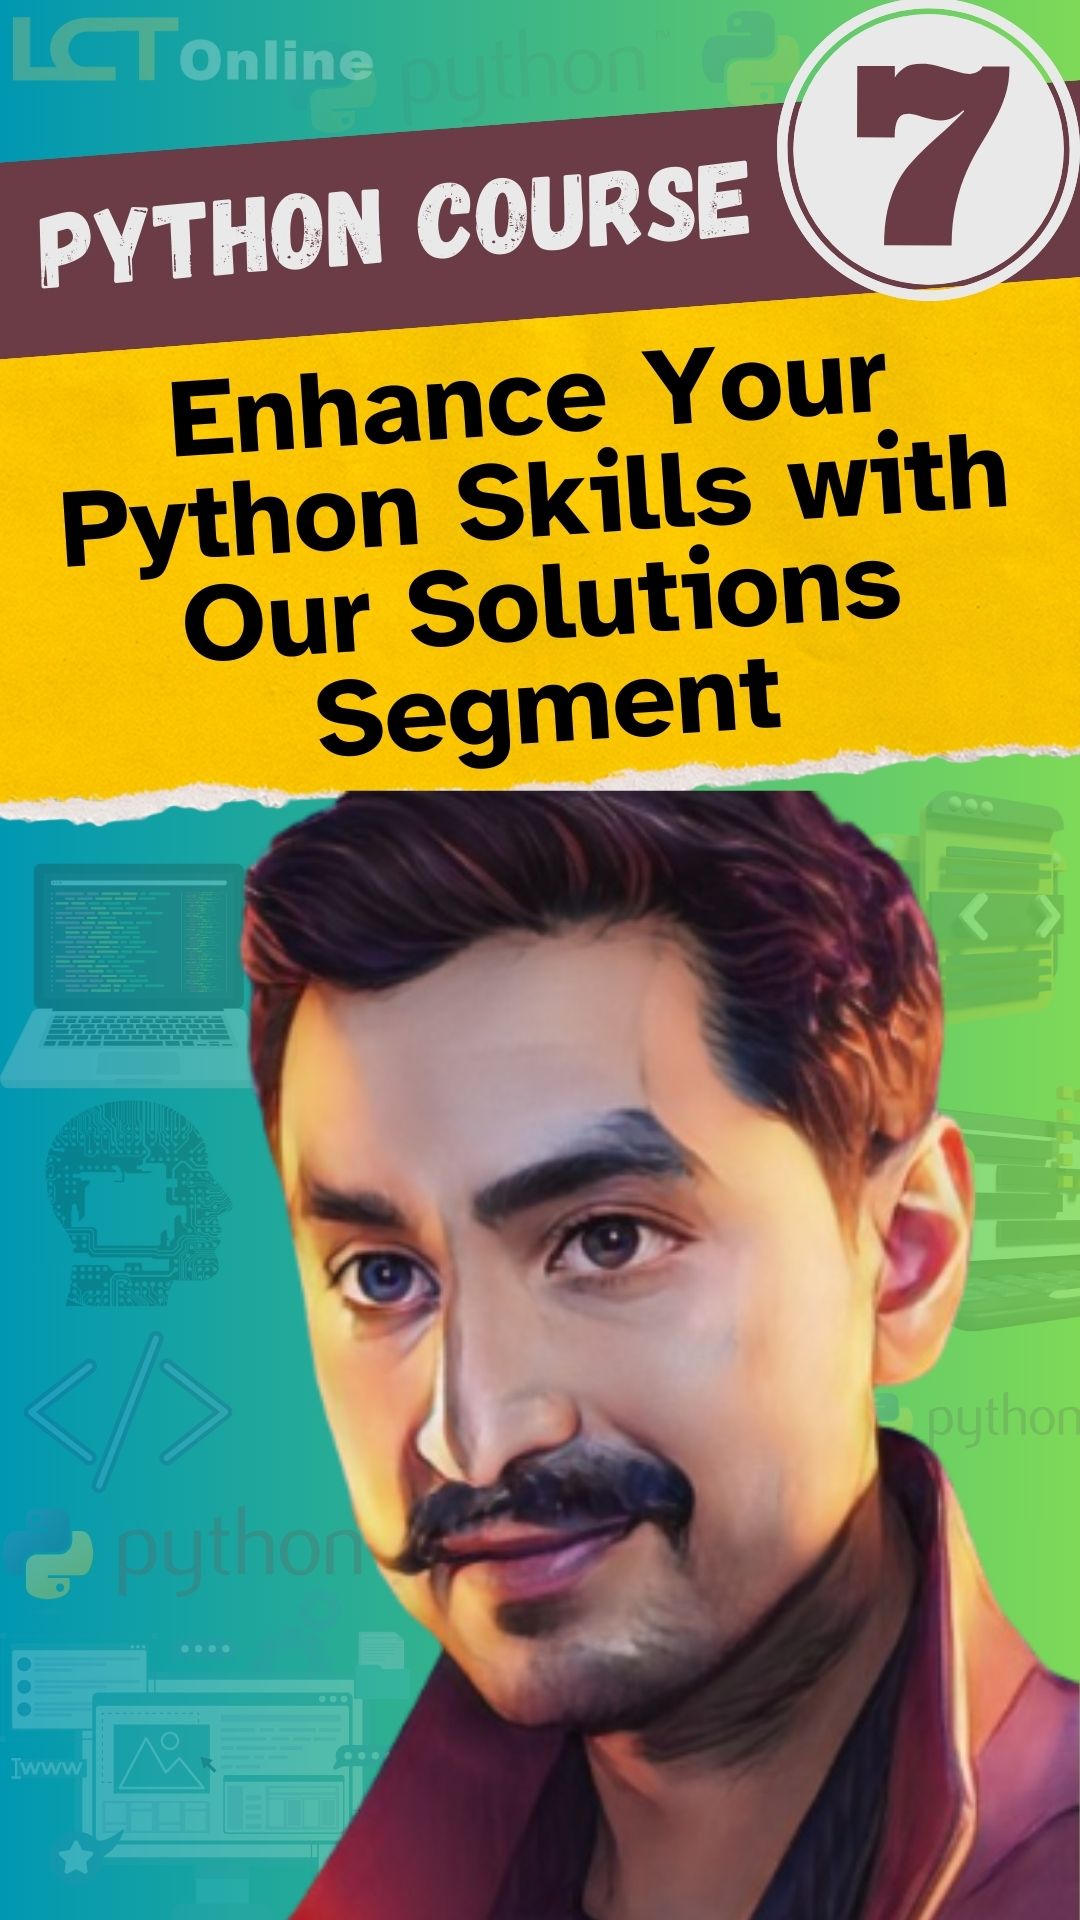 Enhance Your Python Skills with Our Solutions Segment